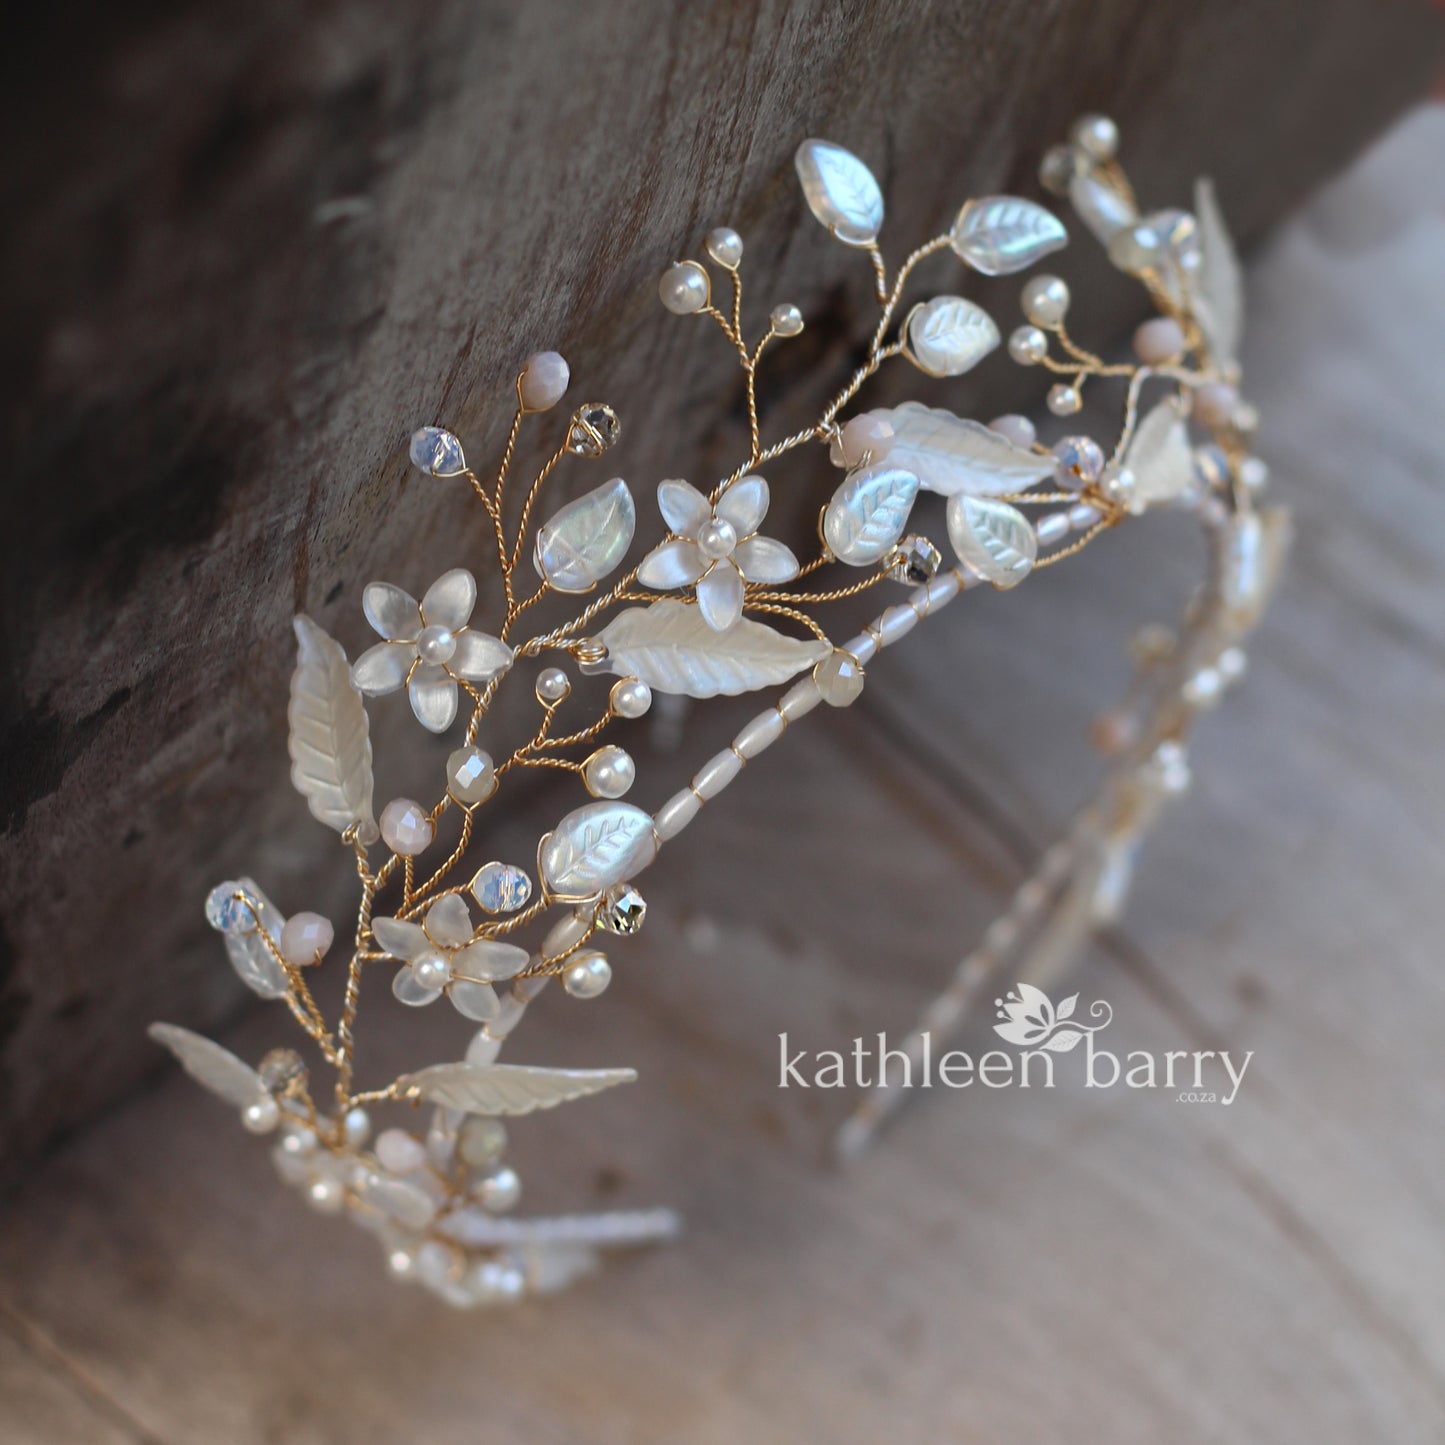 Blythe Iridescent opalescent floral leaf crown - color and finish options available